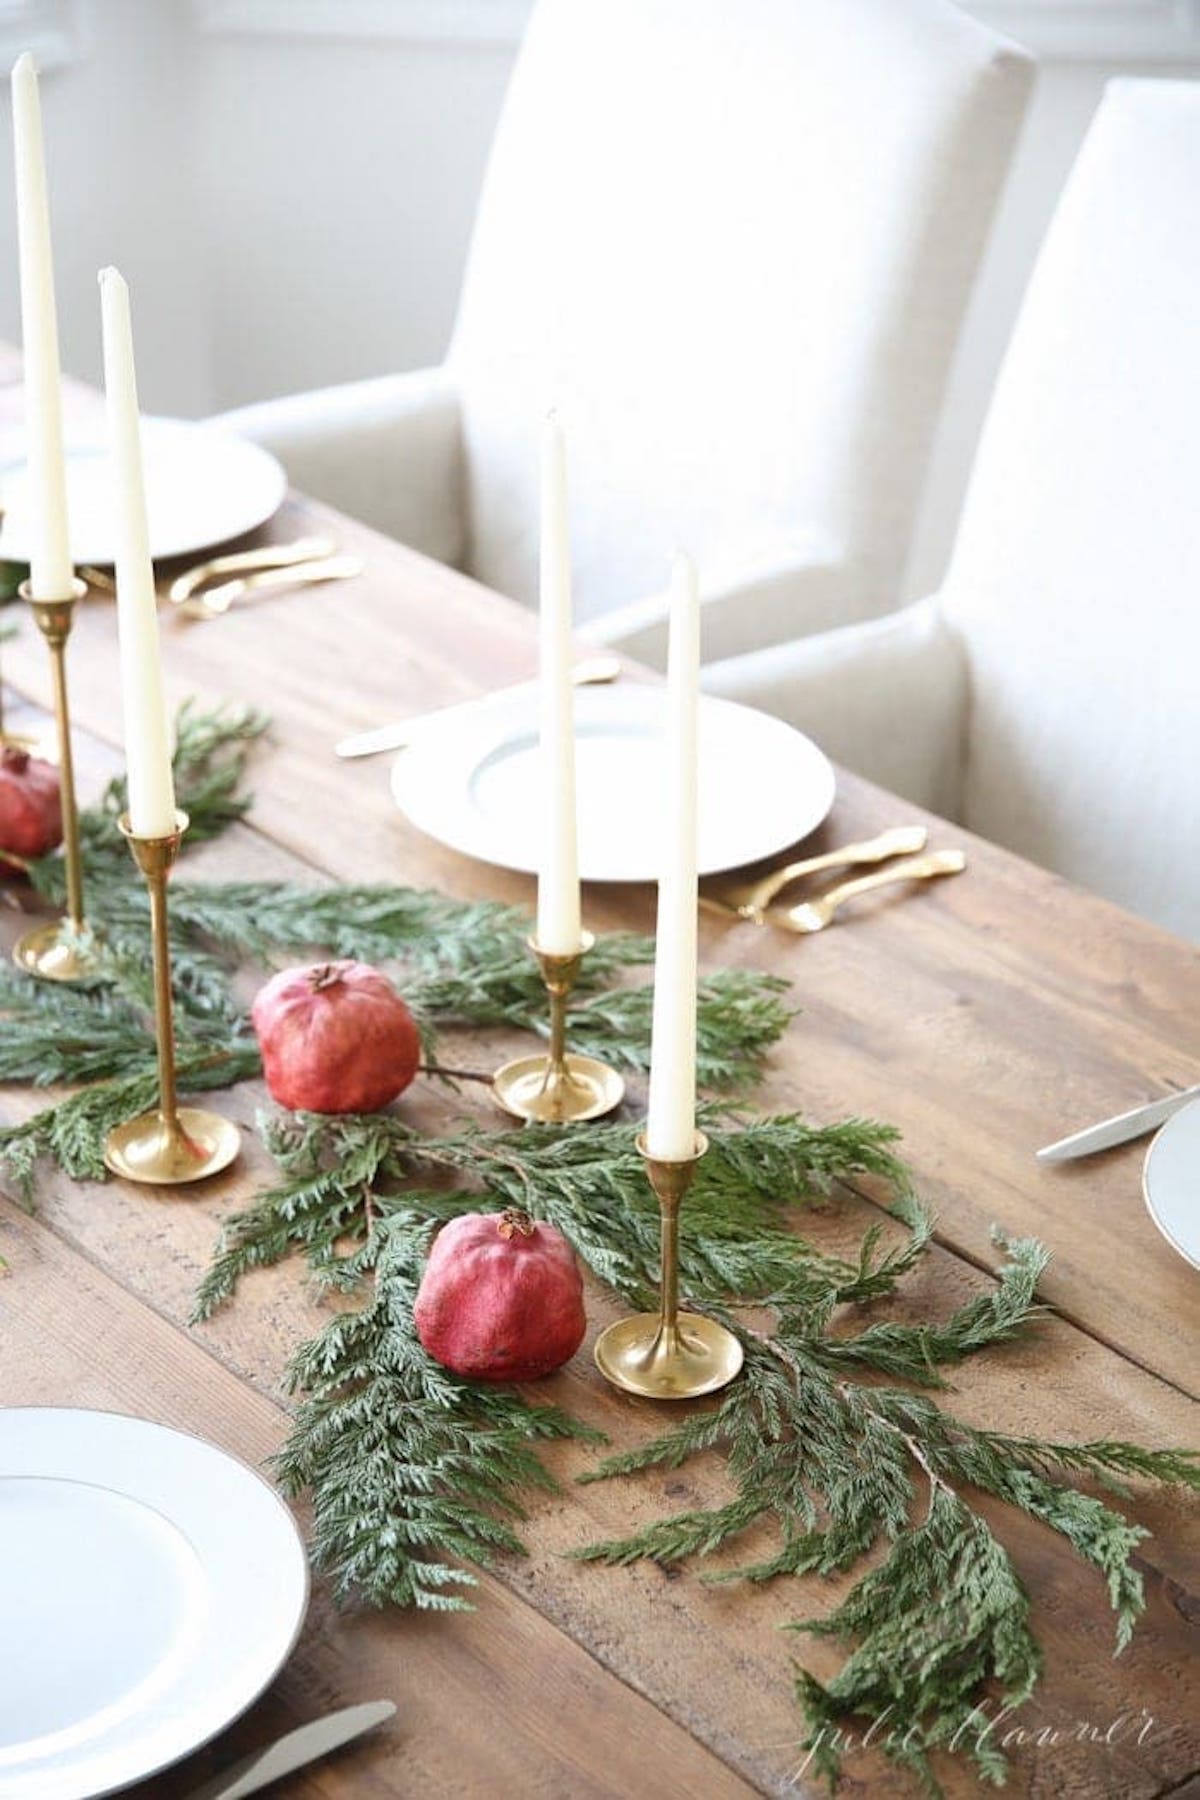 A festive Christmas table setting featuring a captivating centerpiece arrangement of candles and pomegranates.